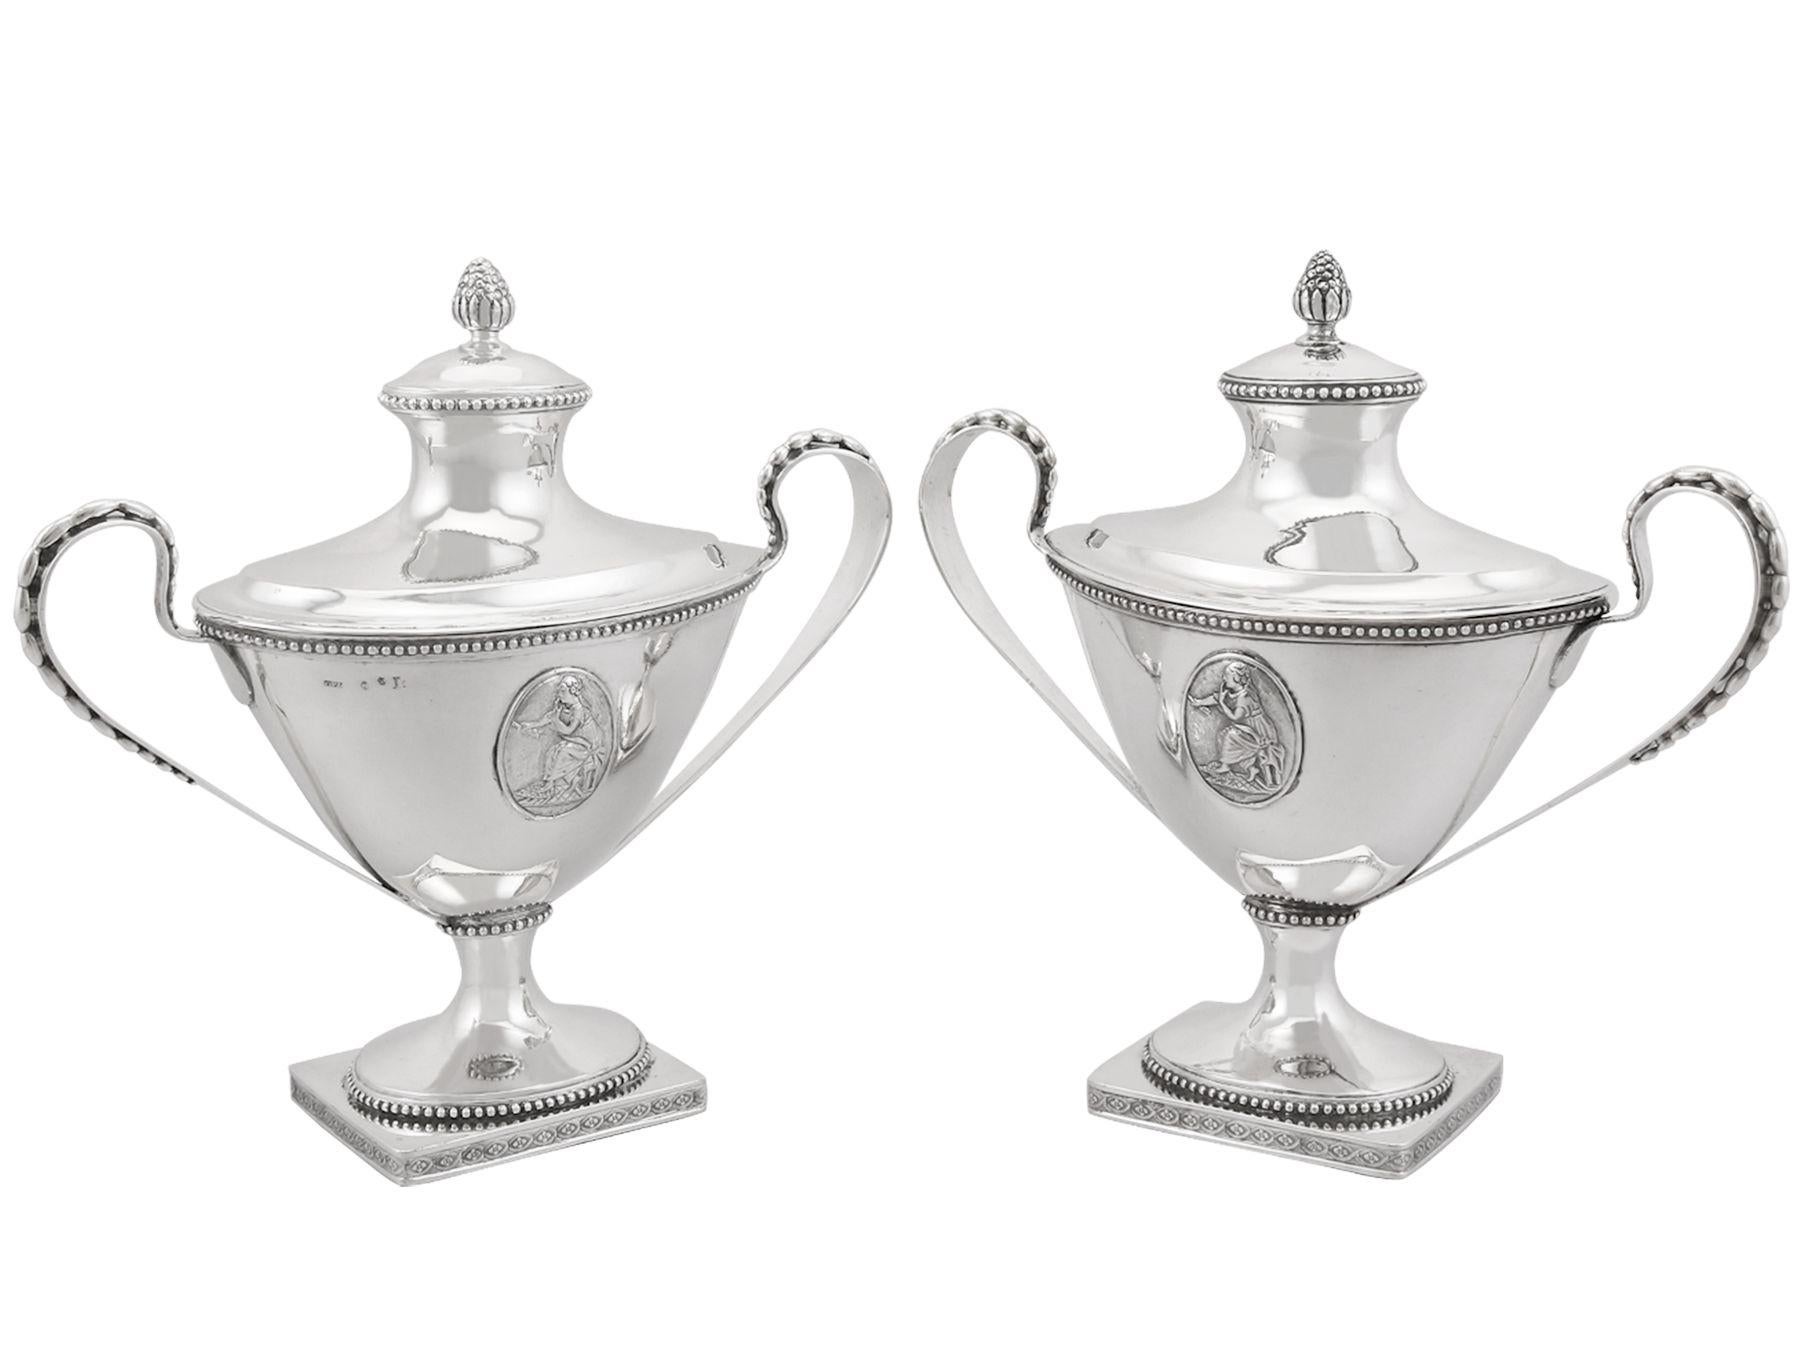 Antique 1791 Swedish Silver Sauce Tureens In Excellent Condition For Sale In Jesmond, Newcastle Upon Tyne